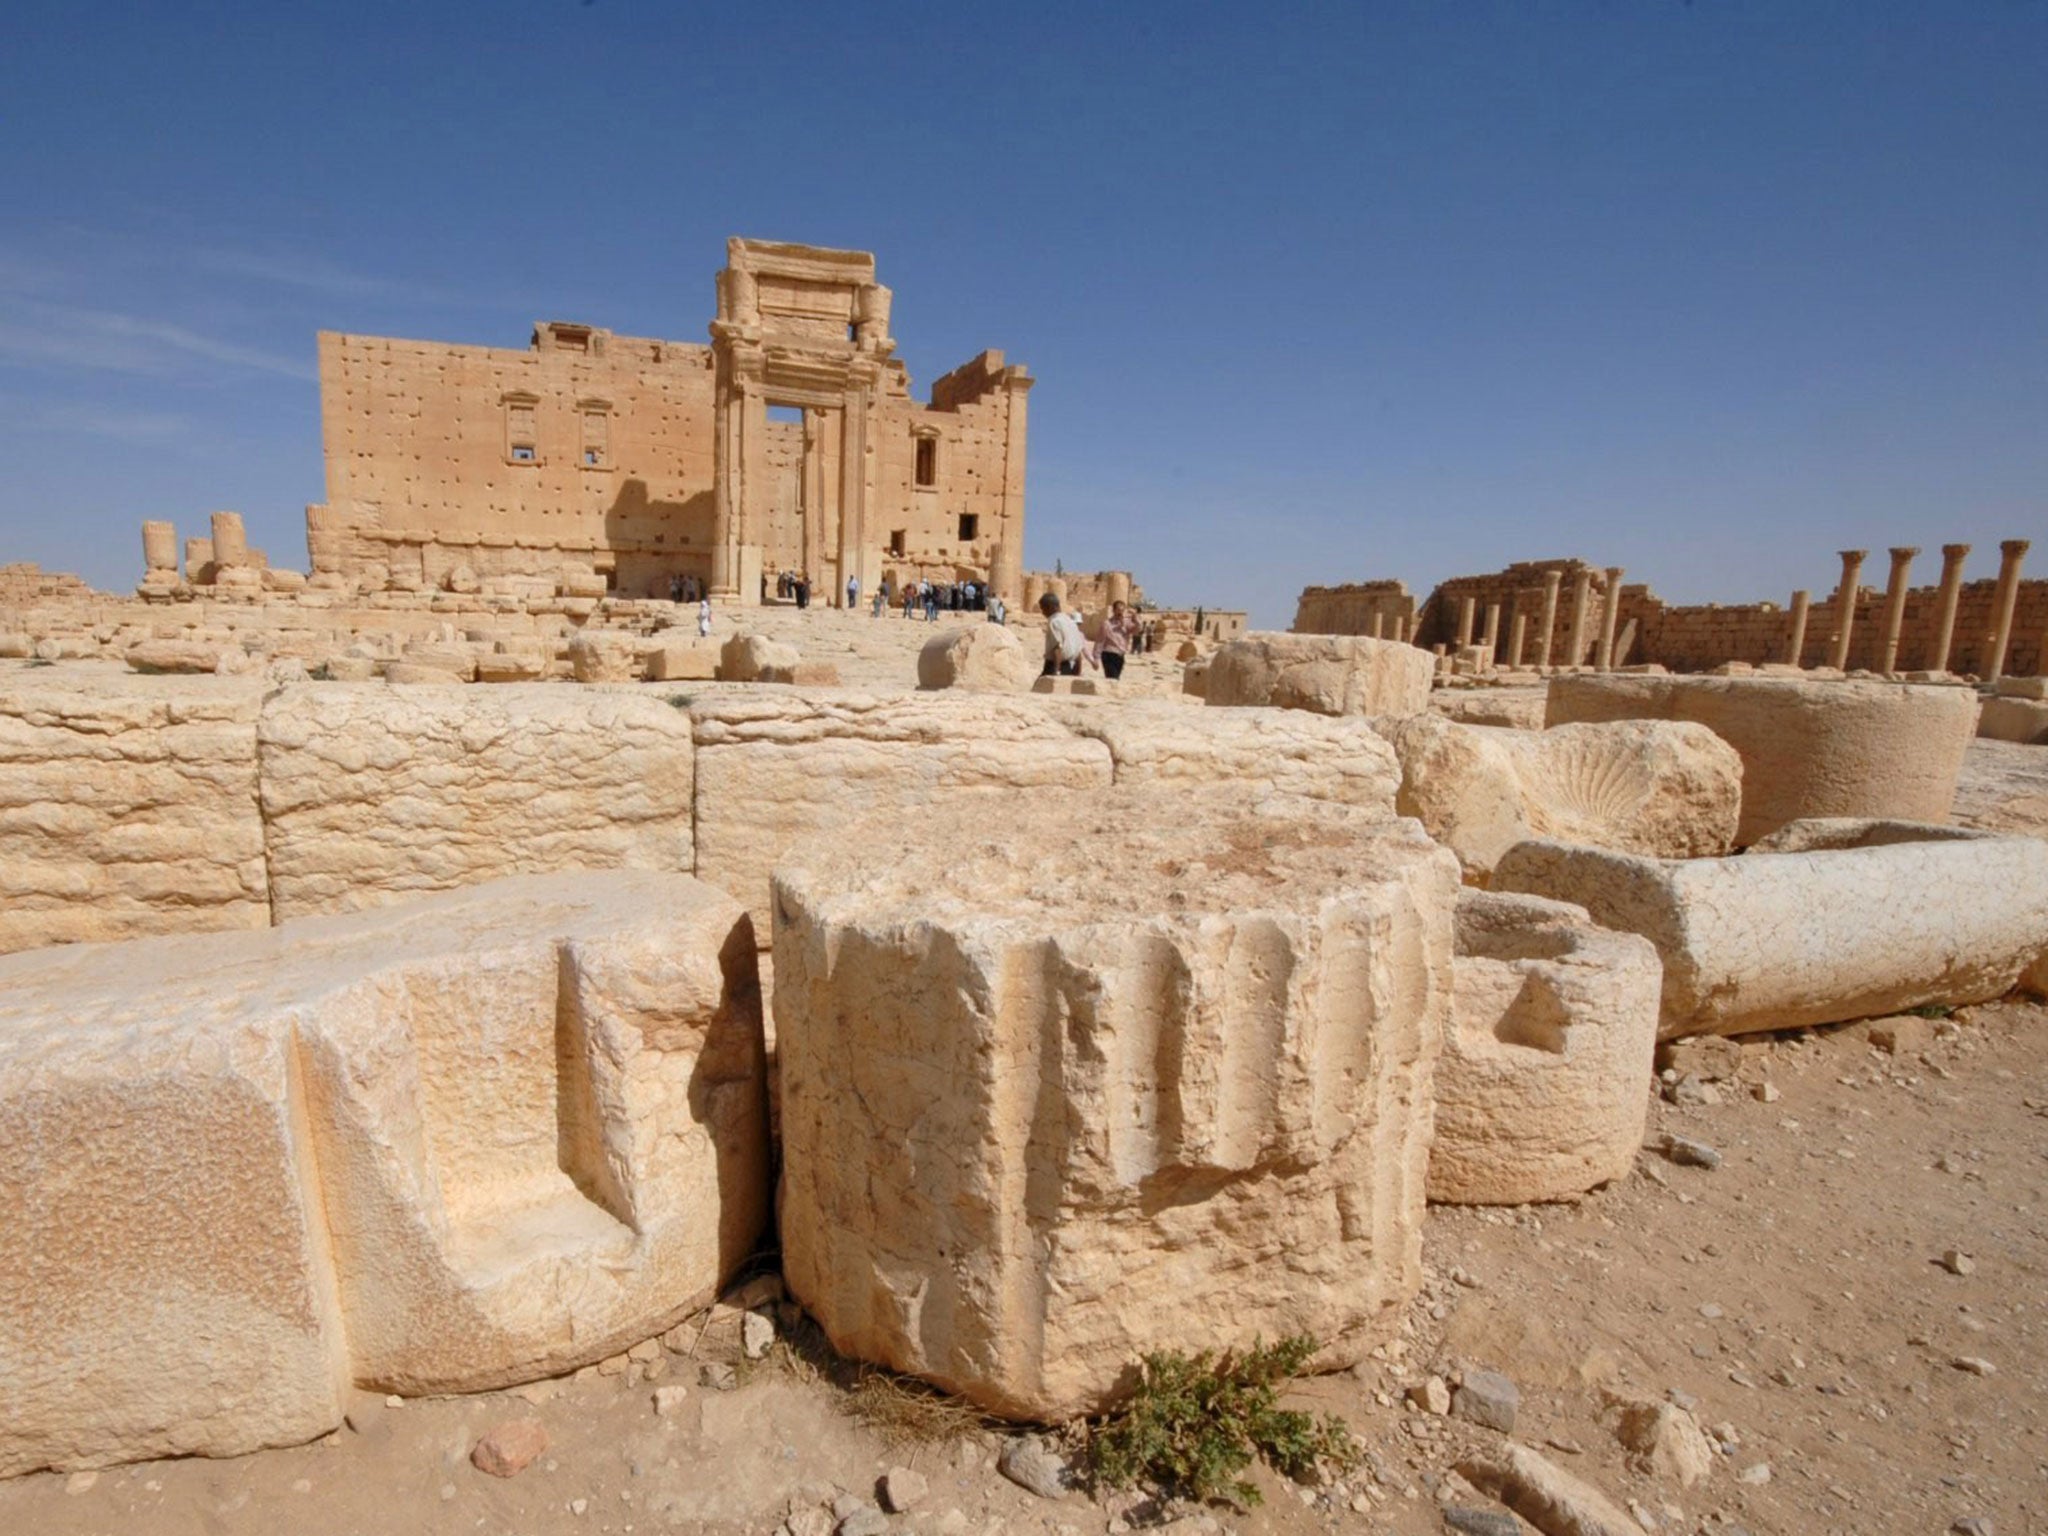 The Temple of Bel at Palmyra has since been destroyed by Isis militants.